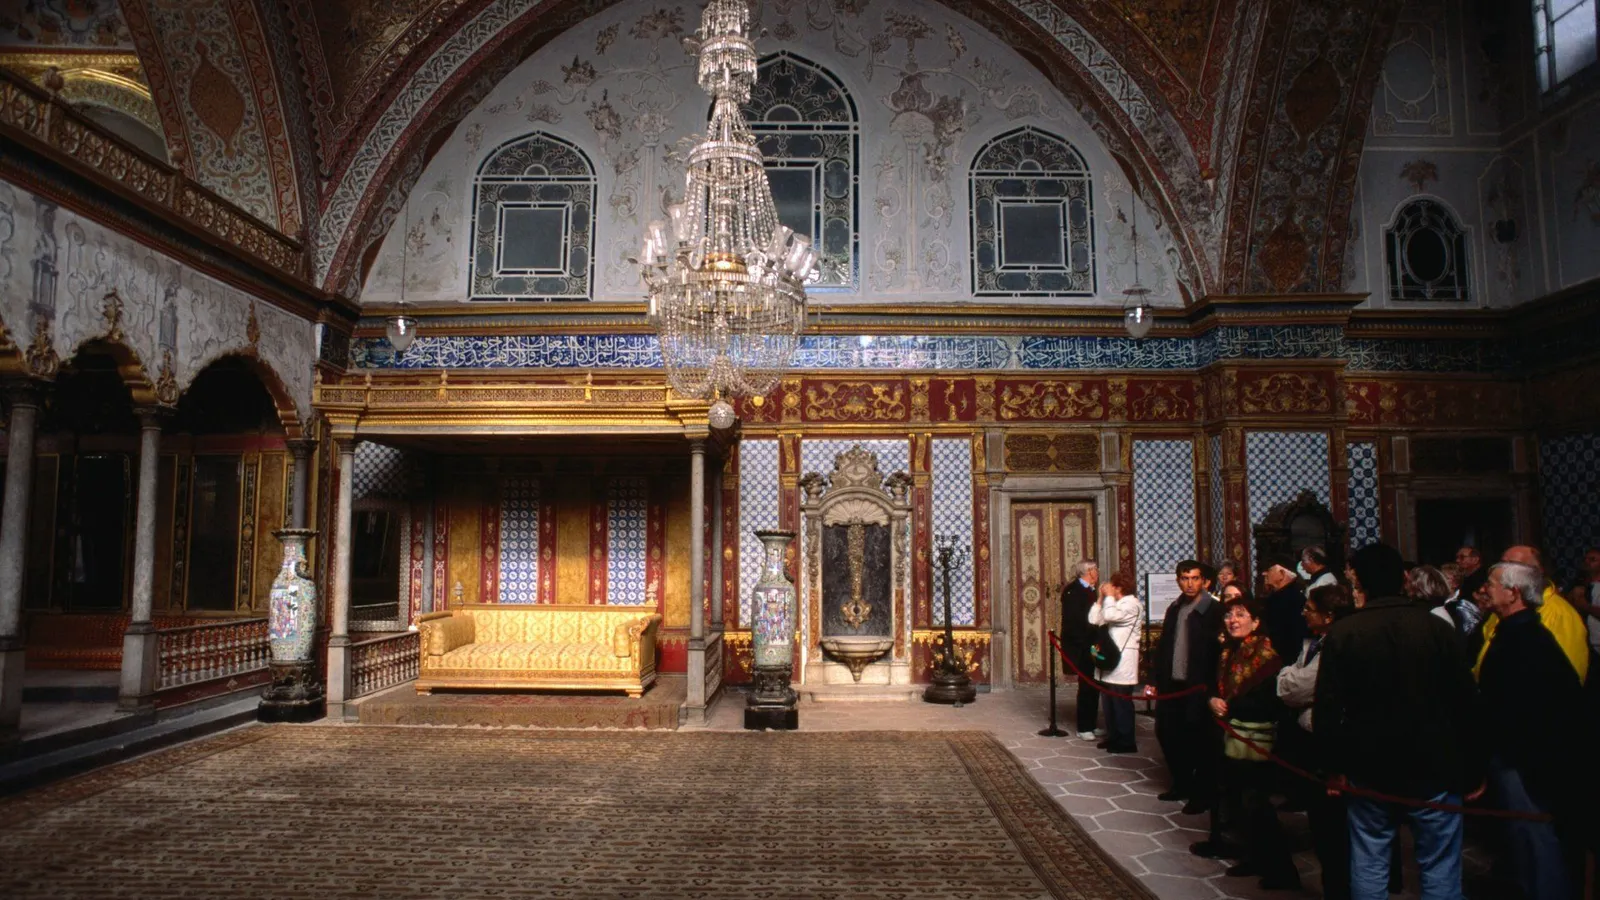 Experience Ottoman Magnificence at Topkapi Palace